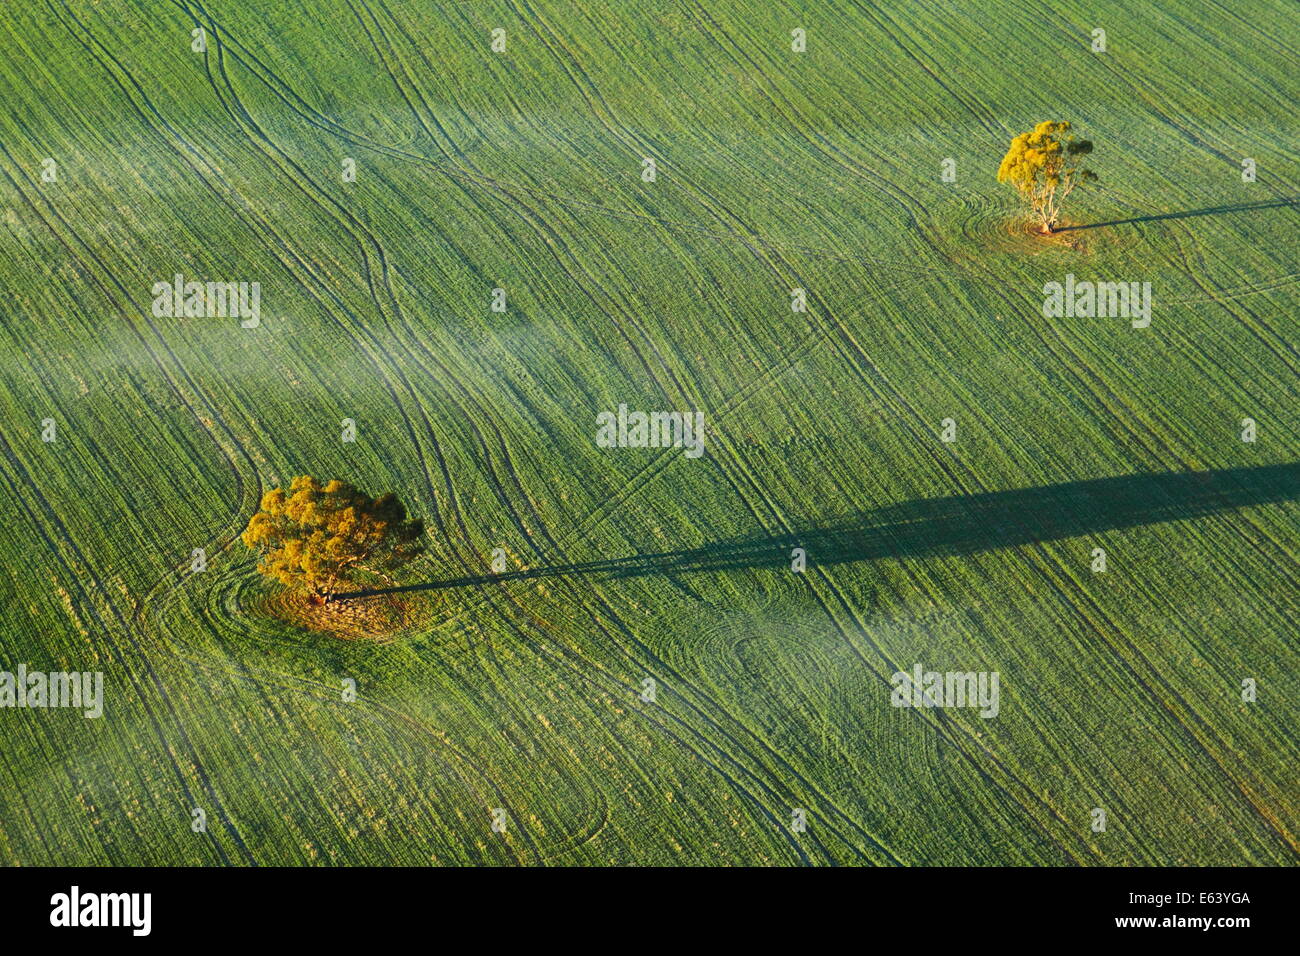 A pair of trees cast shadows upon a crop of wheat, viewed from a hot air balloon near Northam, Avon Valley, Western Australia. Stock Photo